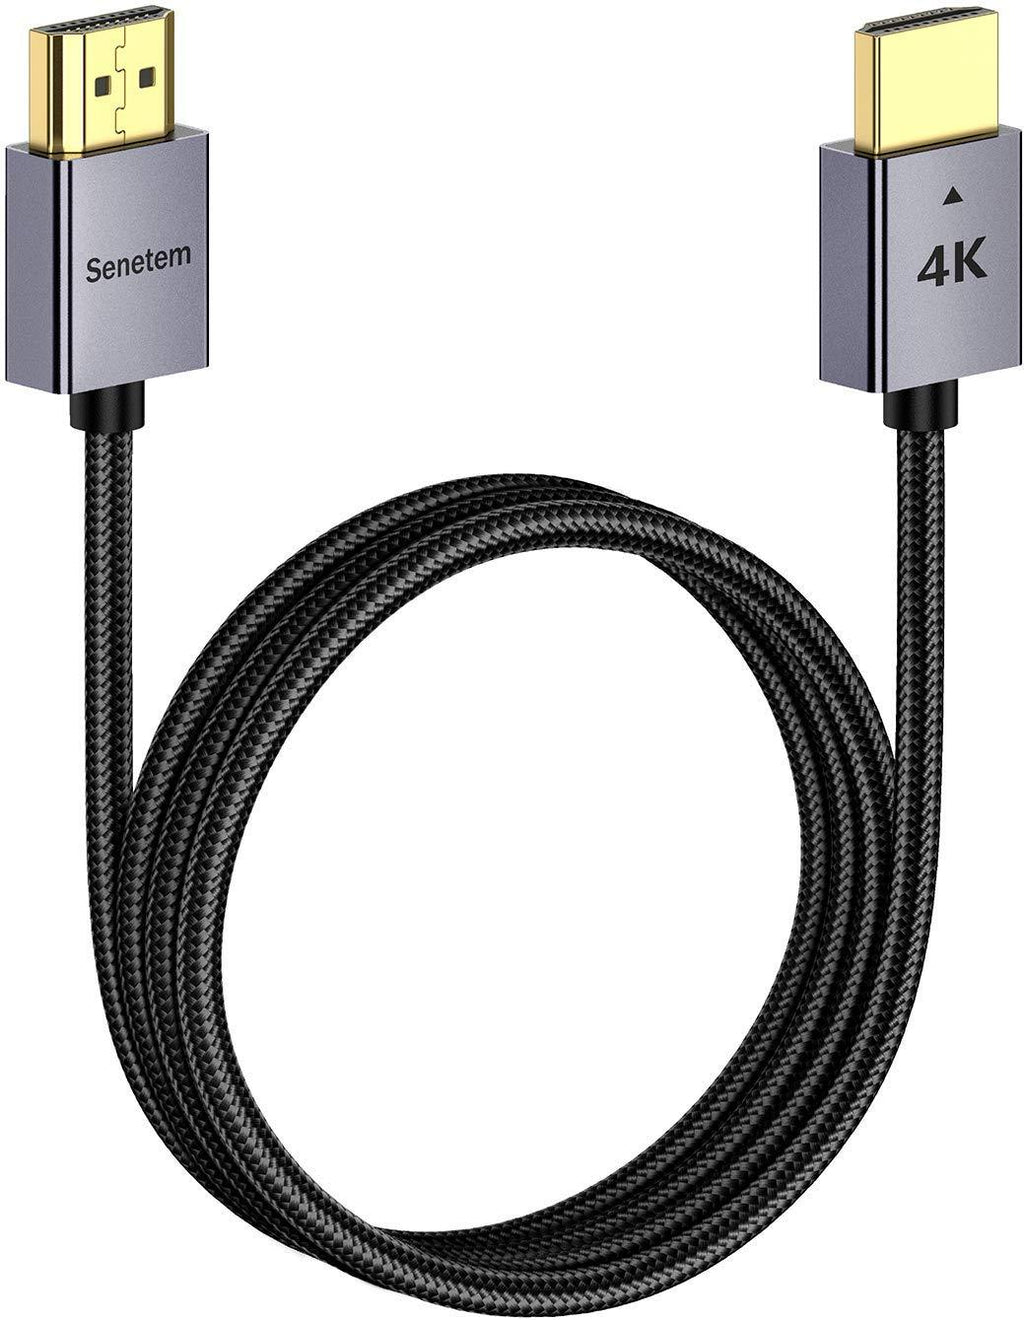 4K HDMI Cable 1 ft High Speed (4K@60Hz, 18Gbps), HDMI 2.0 Cord, Cotton Braided, Slim Aluminum Shell, Gold-Plated Connectors -4K HDR, ARC, for Gaming Monitor, TV, X-Box, PS5/4/3 (1 Feet, Braided) 1 Feet